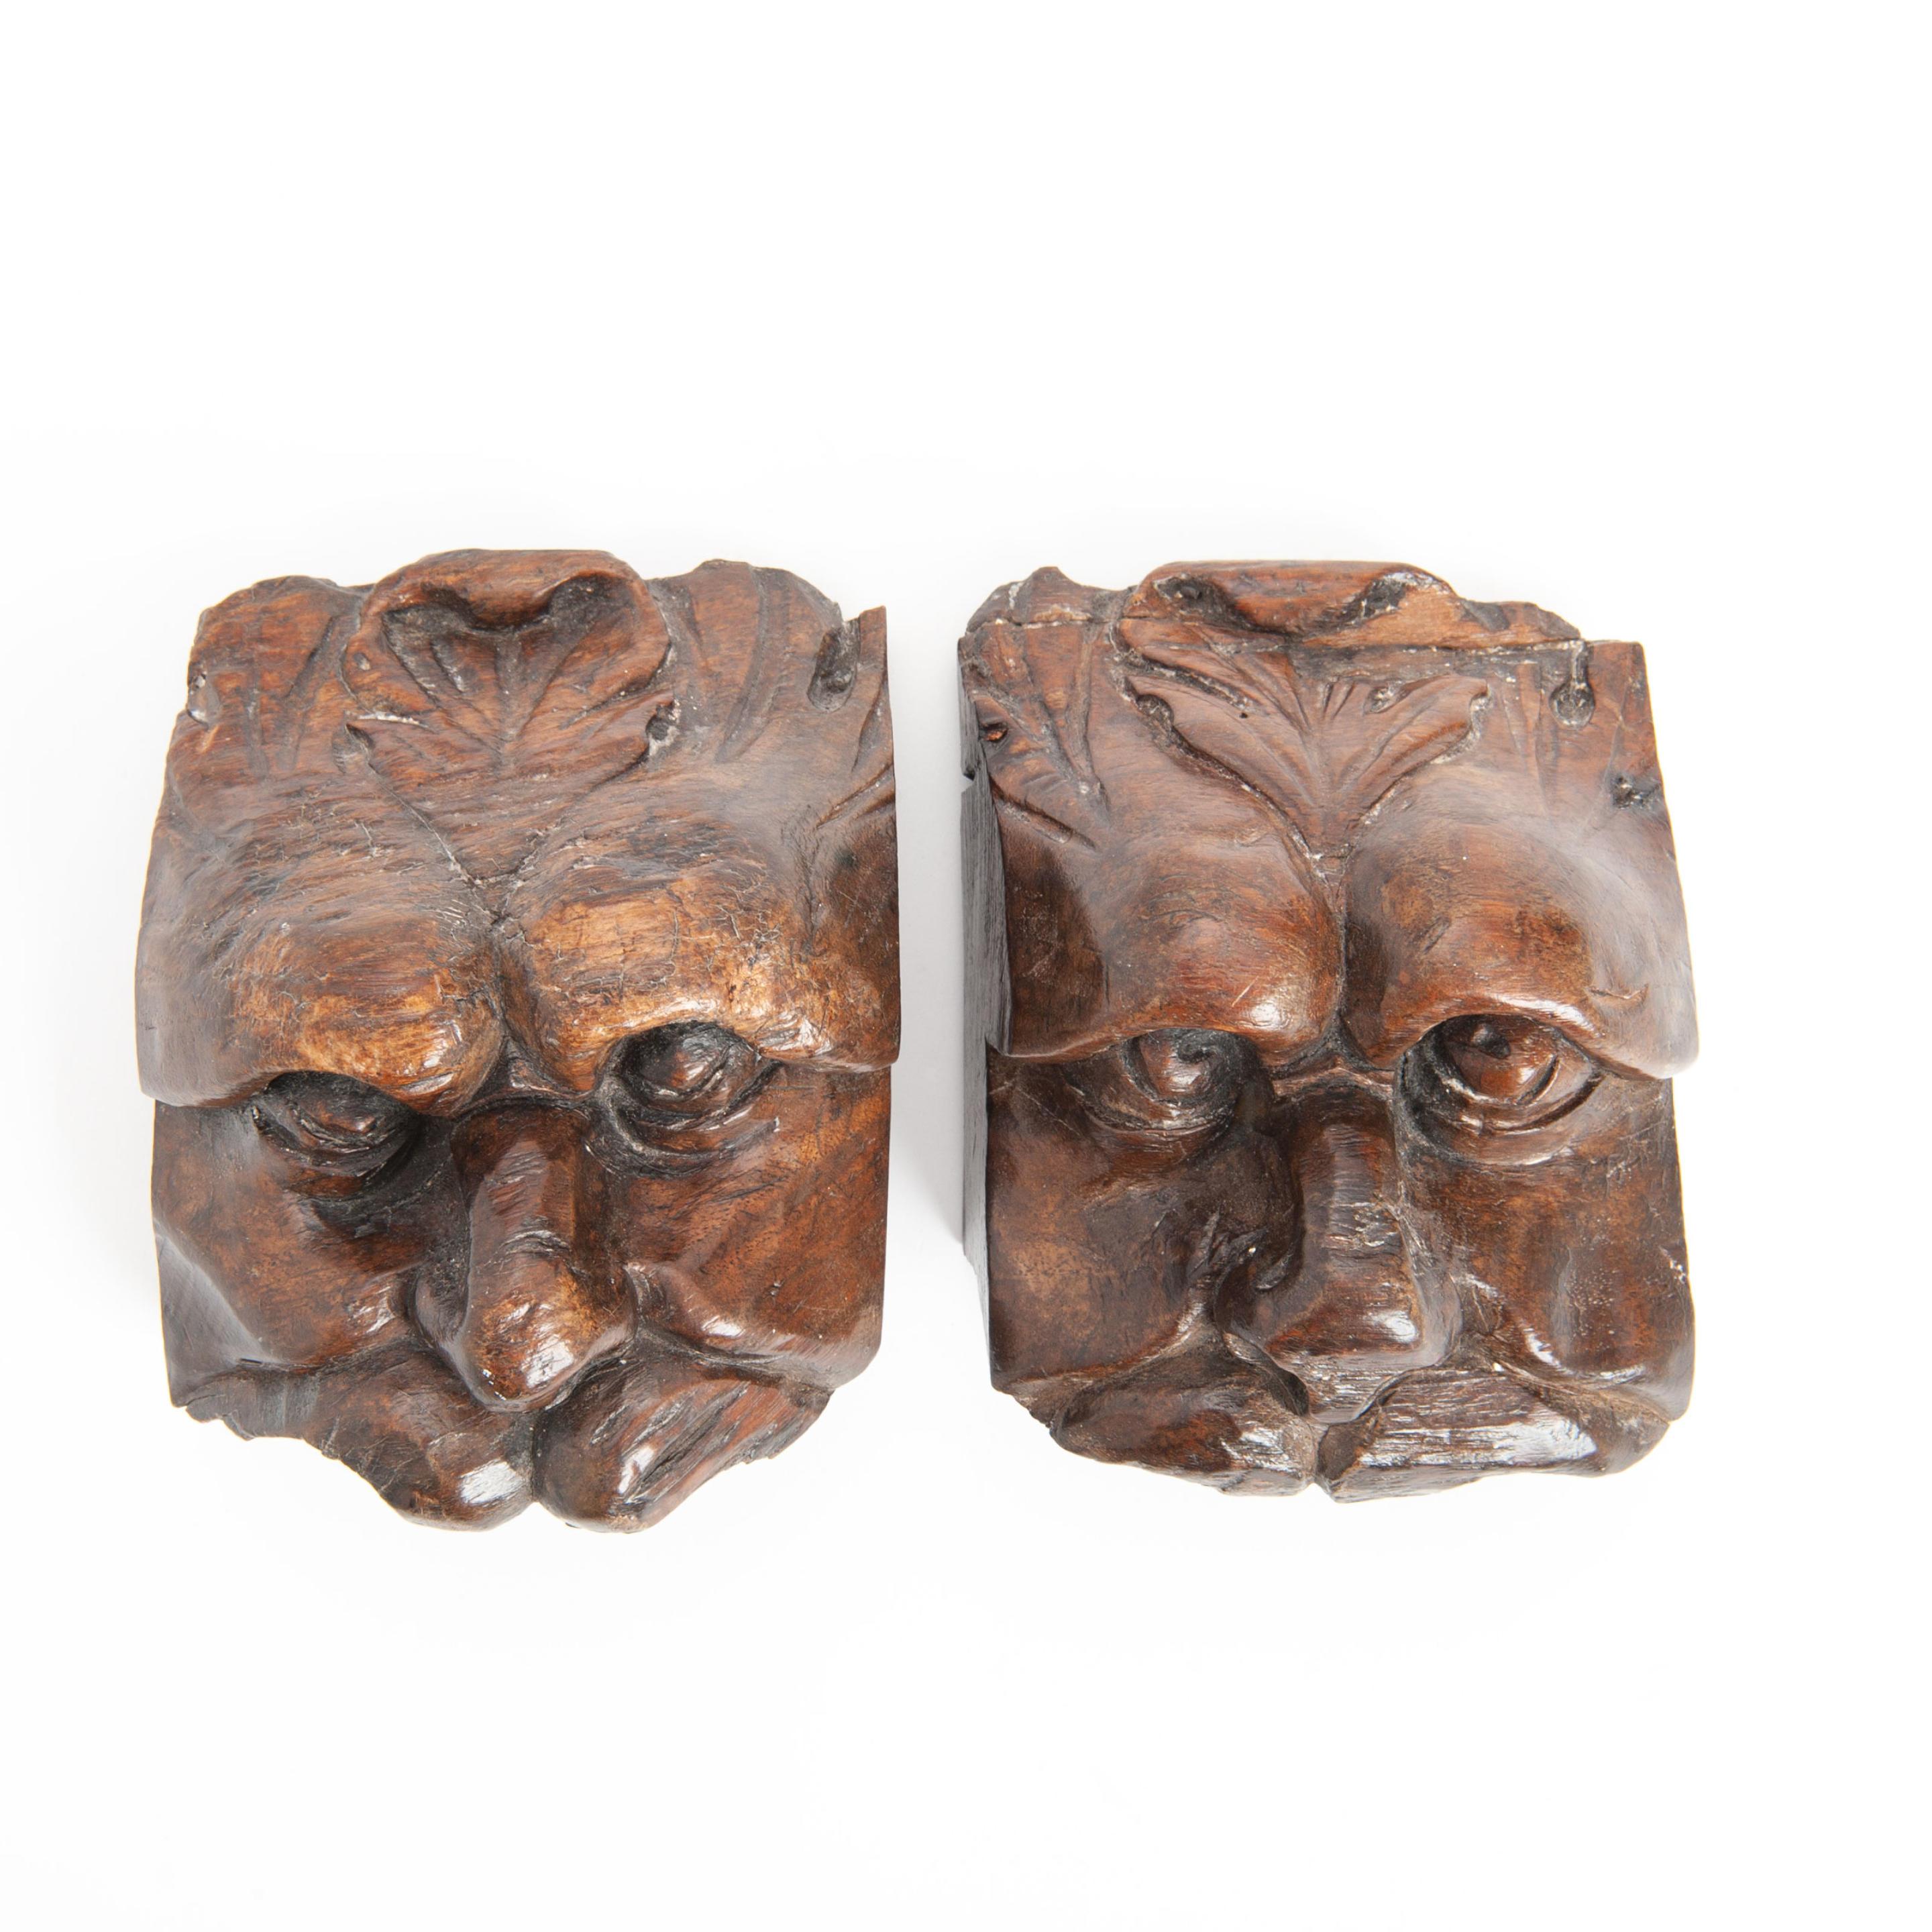 Carved oak lion mask head mounts.
Sold as a pair.
England circa 1820

